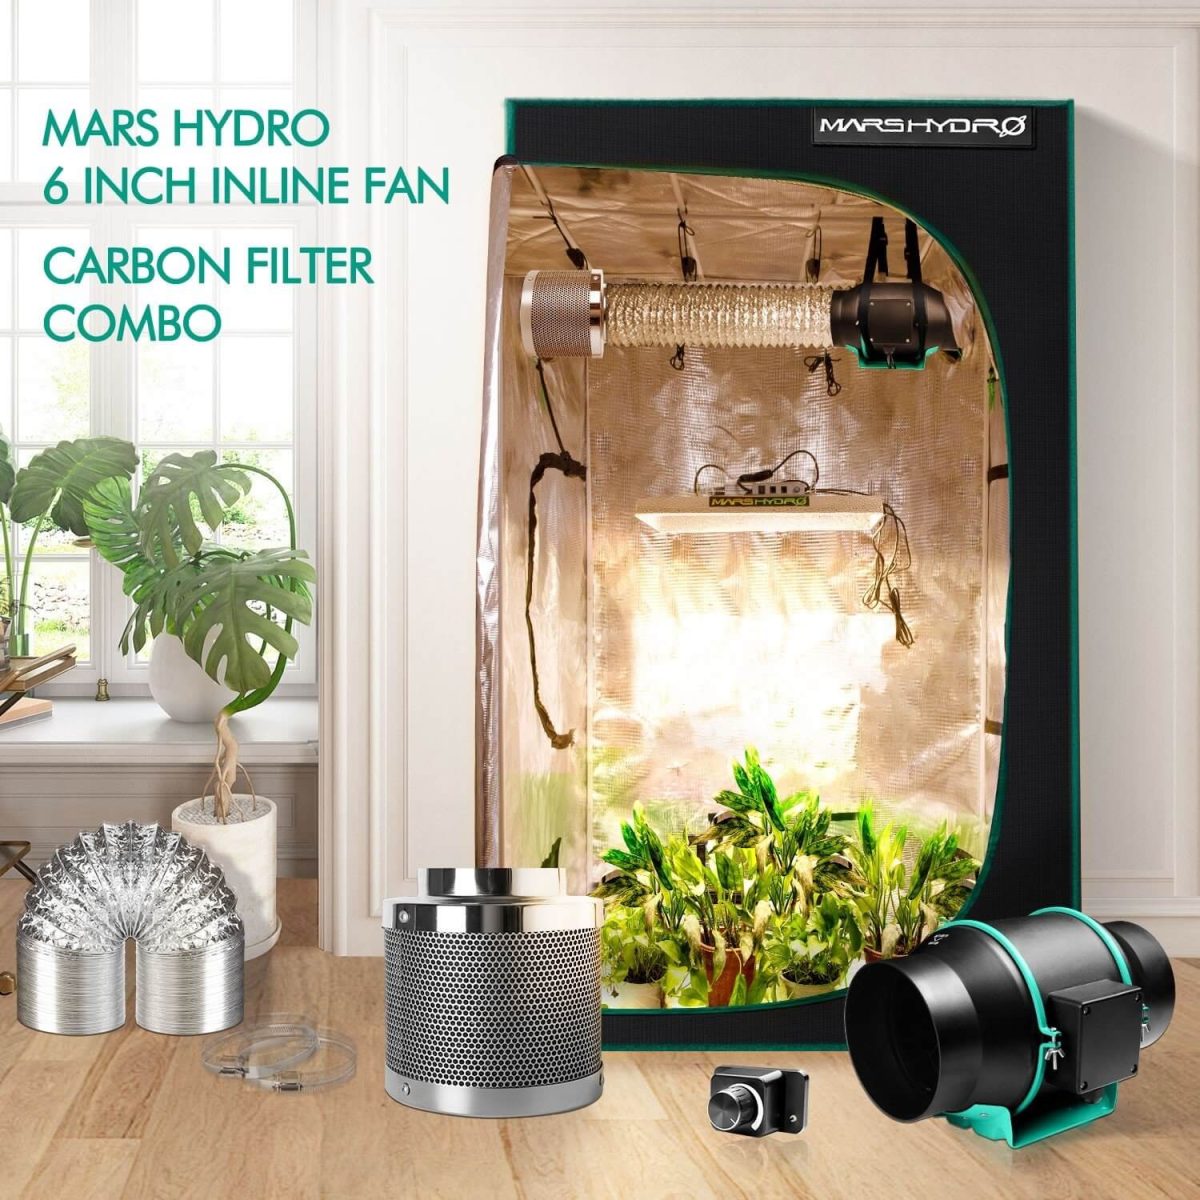 6inch fan & carbon filter kits match Mars Hydro led grow light and grow tent for indoor plants